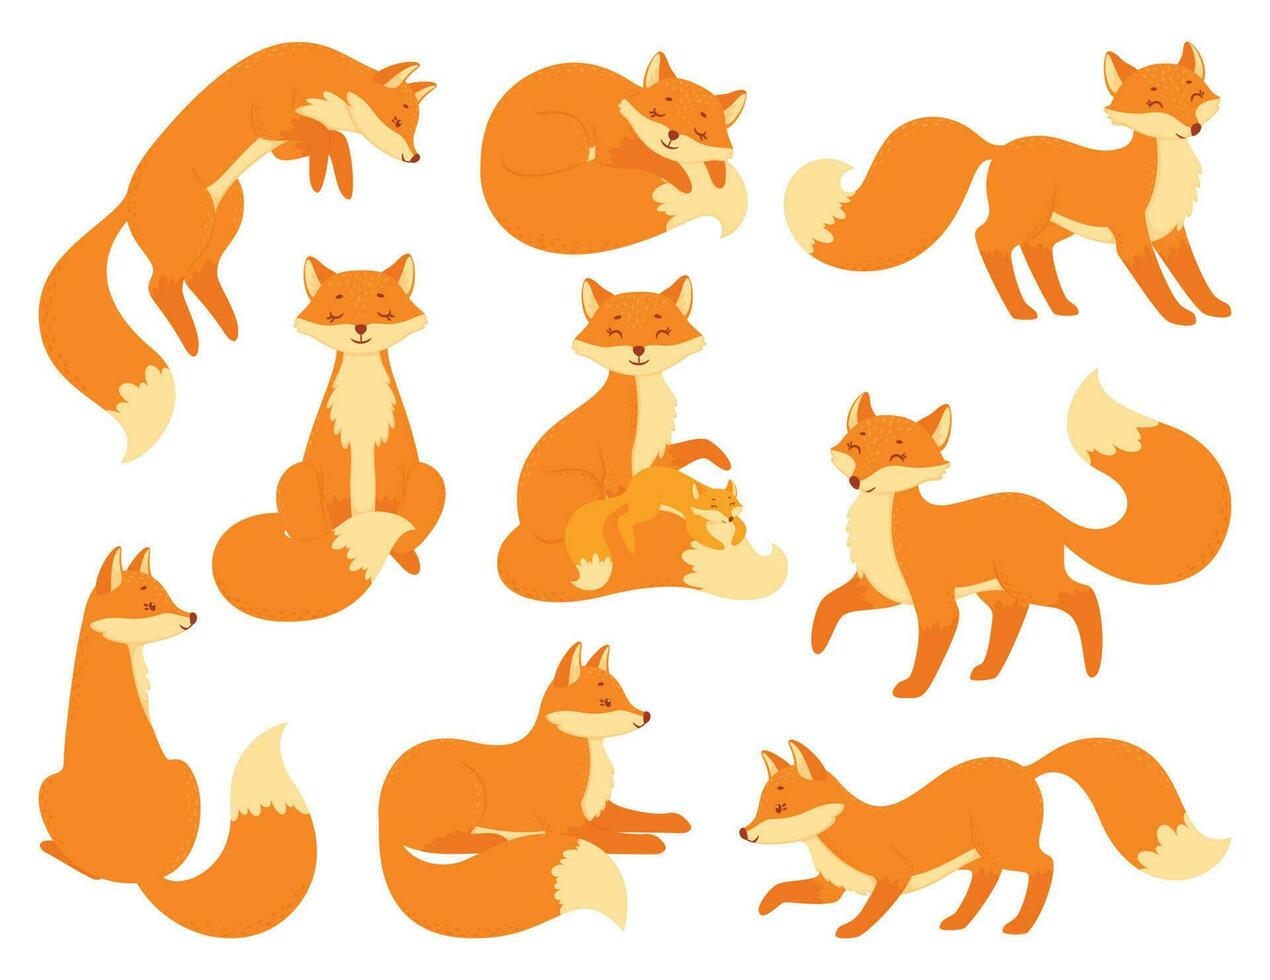 Cartoon red foxes sitting or sleeping, wildlife forest animals. Cute baby fox with mother, woodland animal mascot in different poses vector set